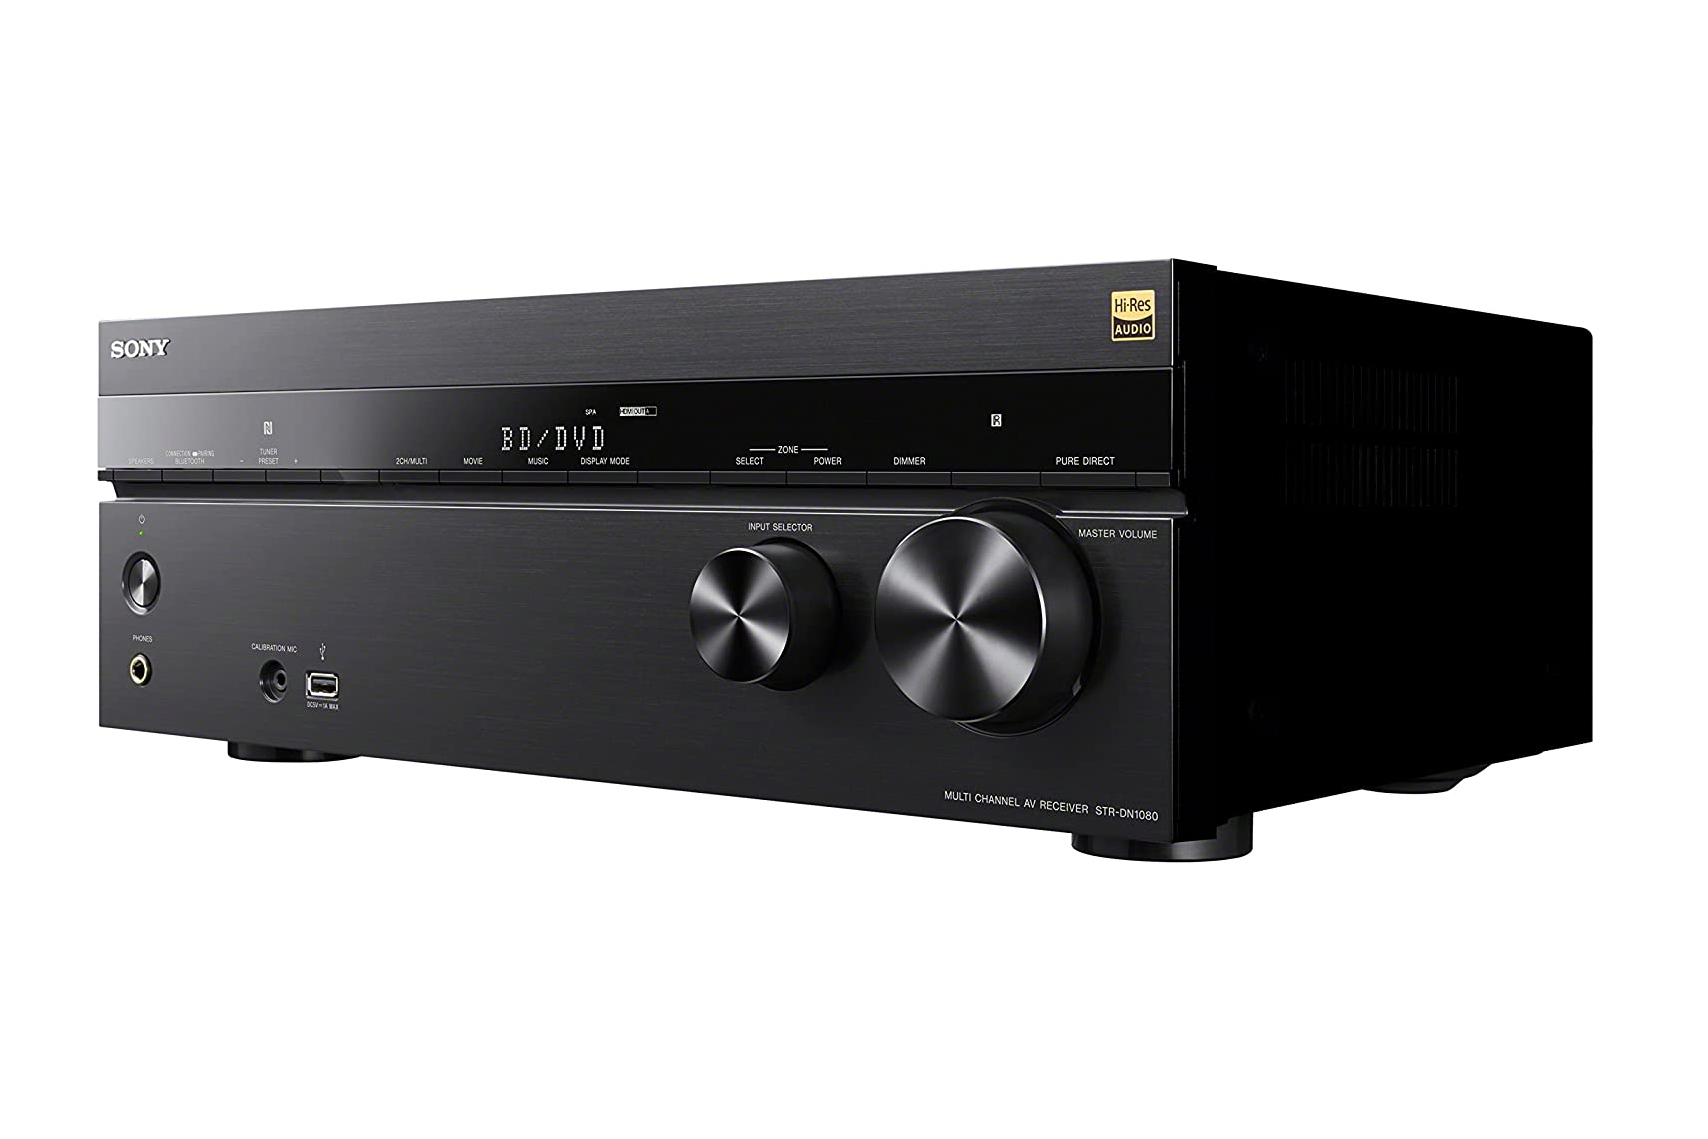 7 Best Home Theater Receivers: Buyer’s Guide (2021) | Heavy.com